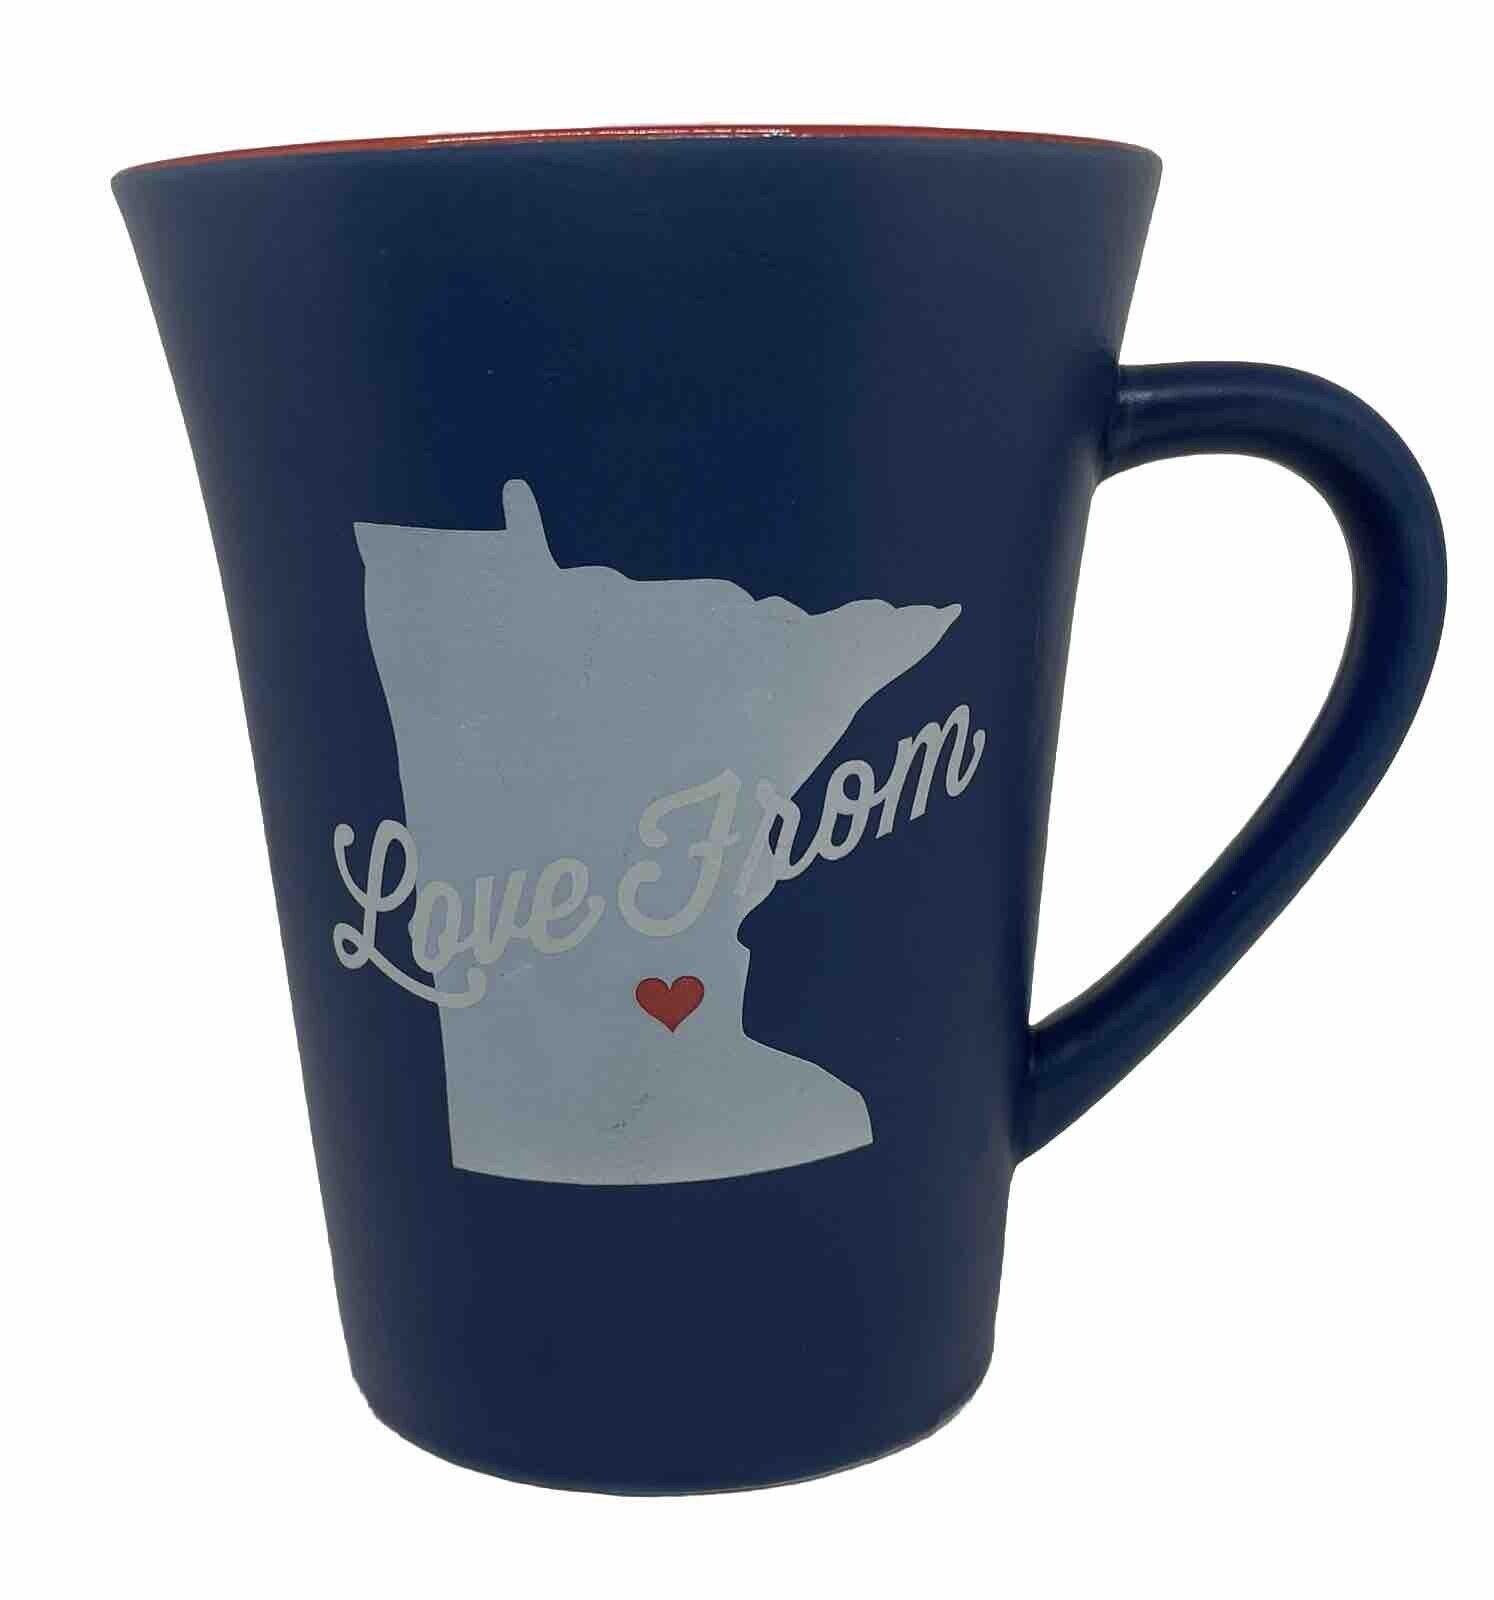 MINNESOTA COFFEE MUG WITH HEART IN THE BOTTOM OF THE CUP BLUE 12 OZ